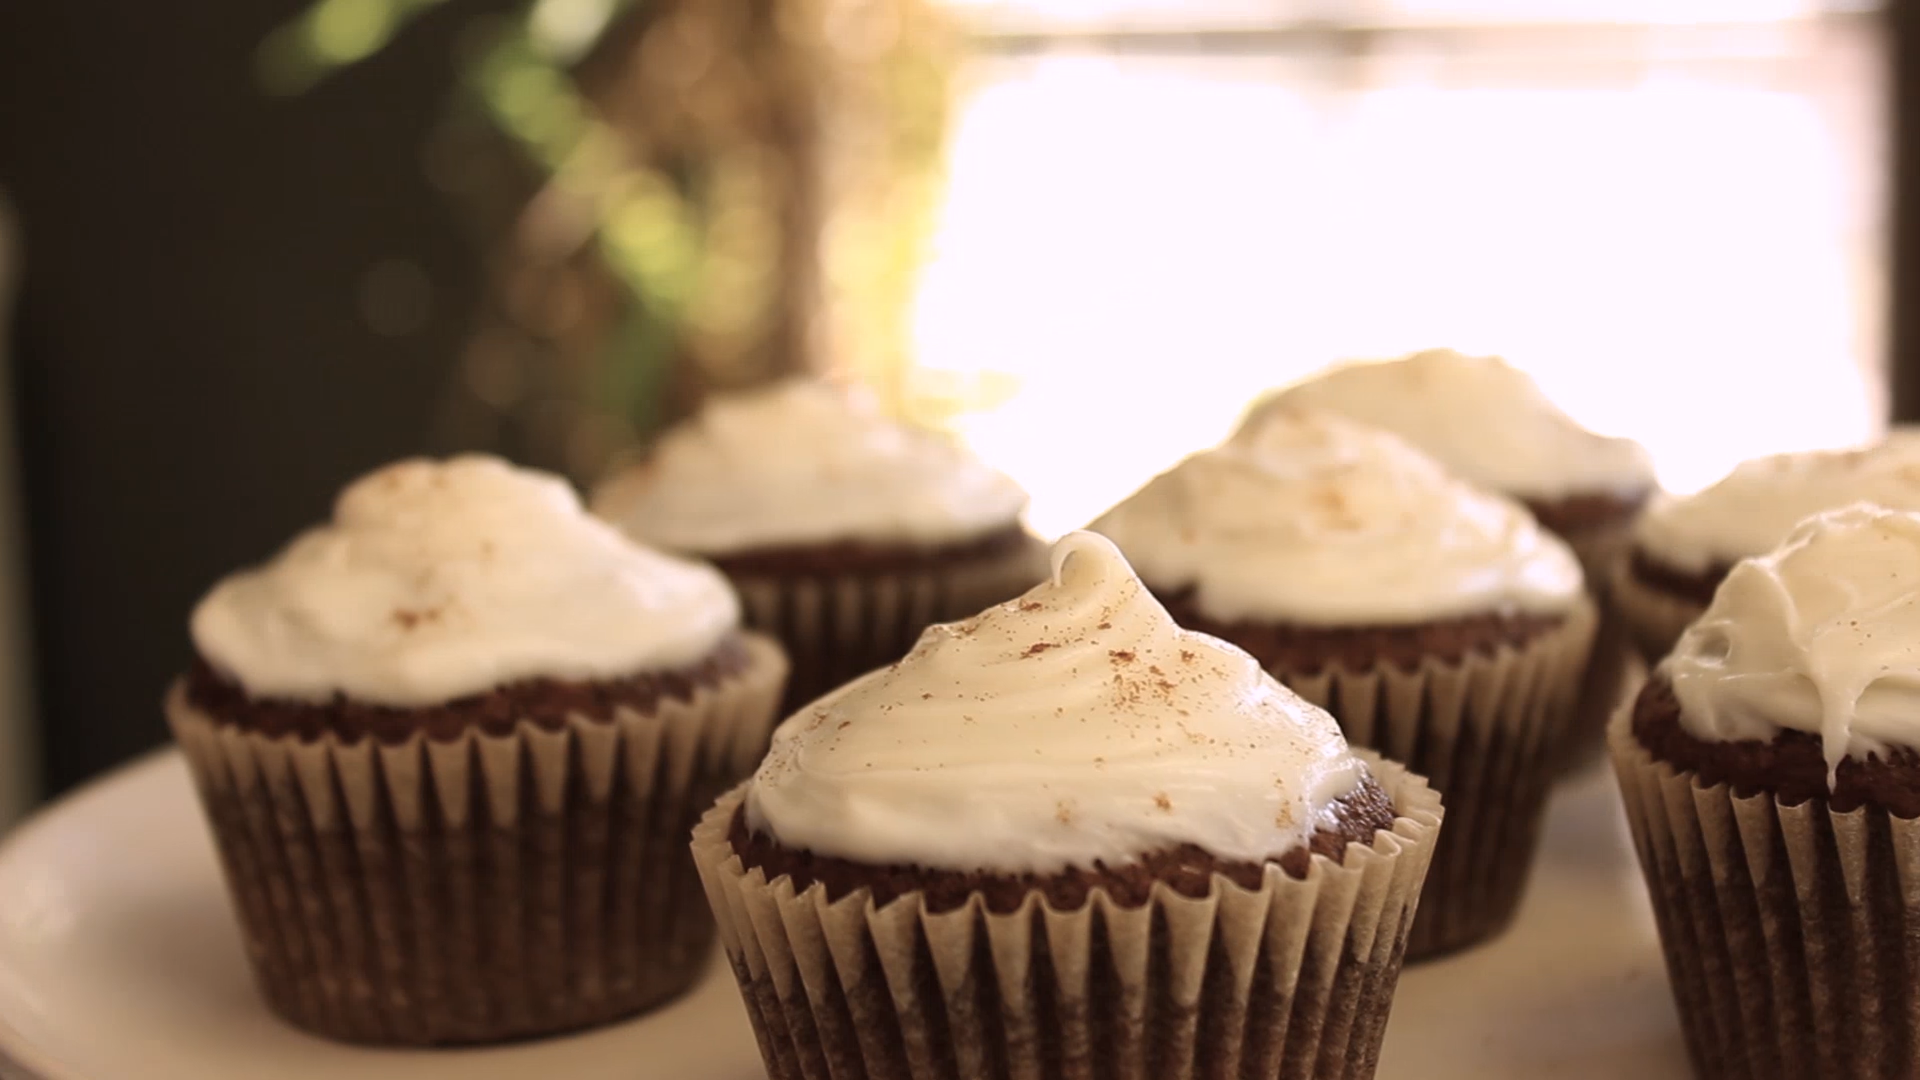 Delicious Skinny Cupcakes with Vanilla Frosting [Video]